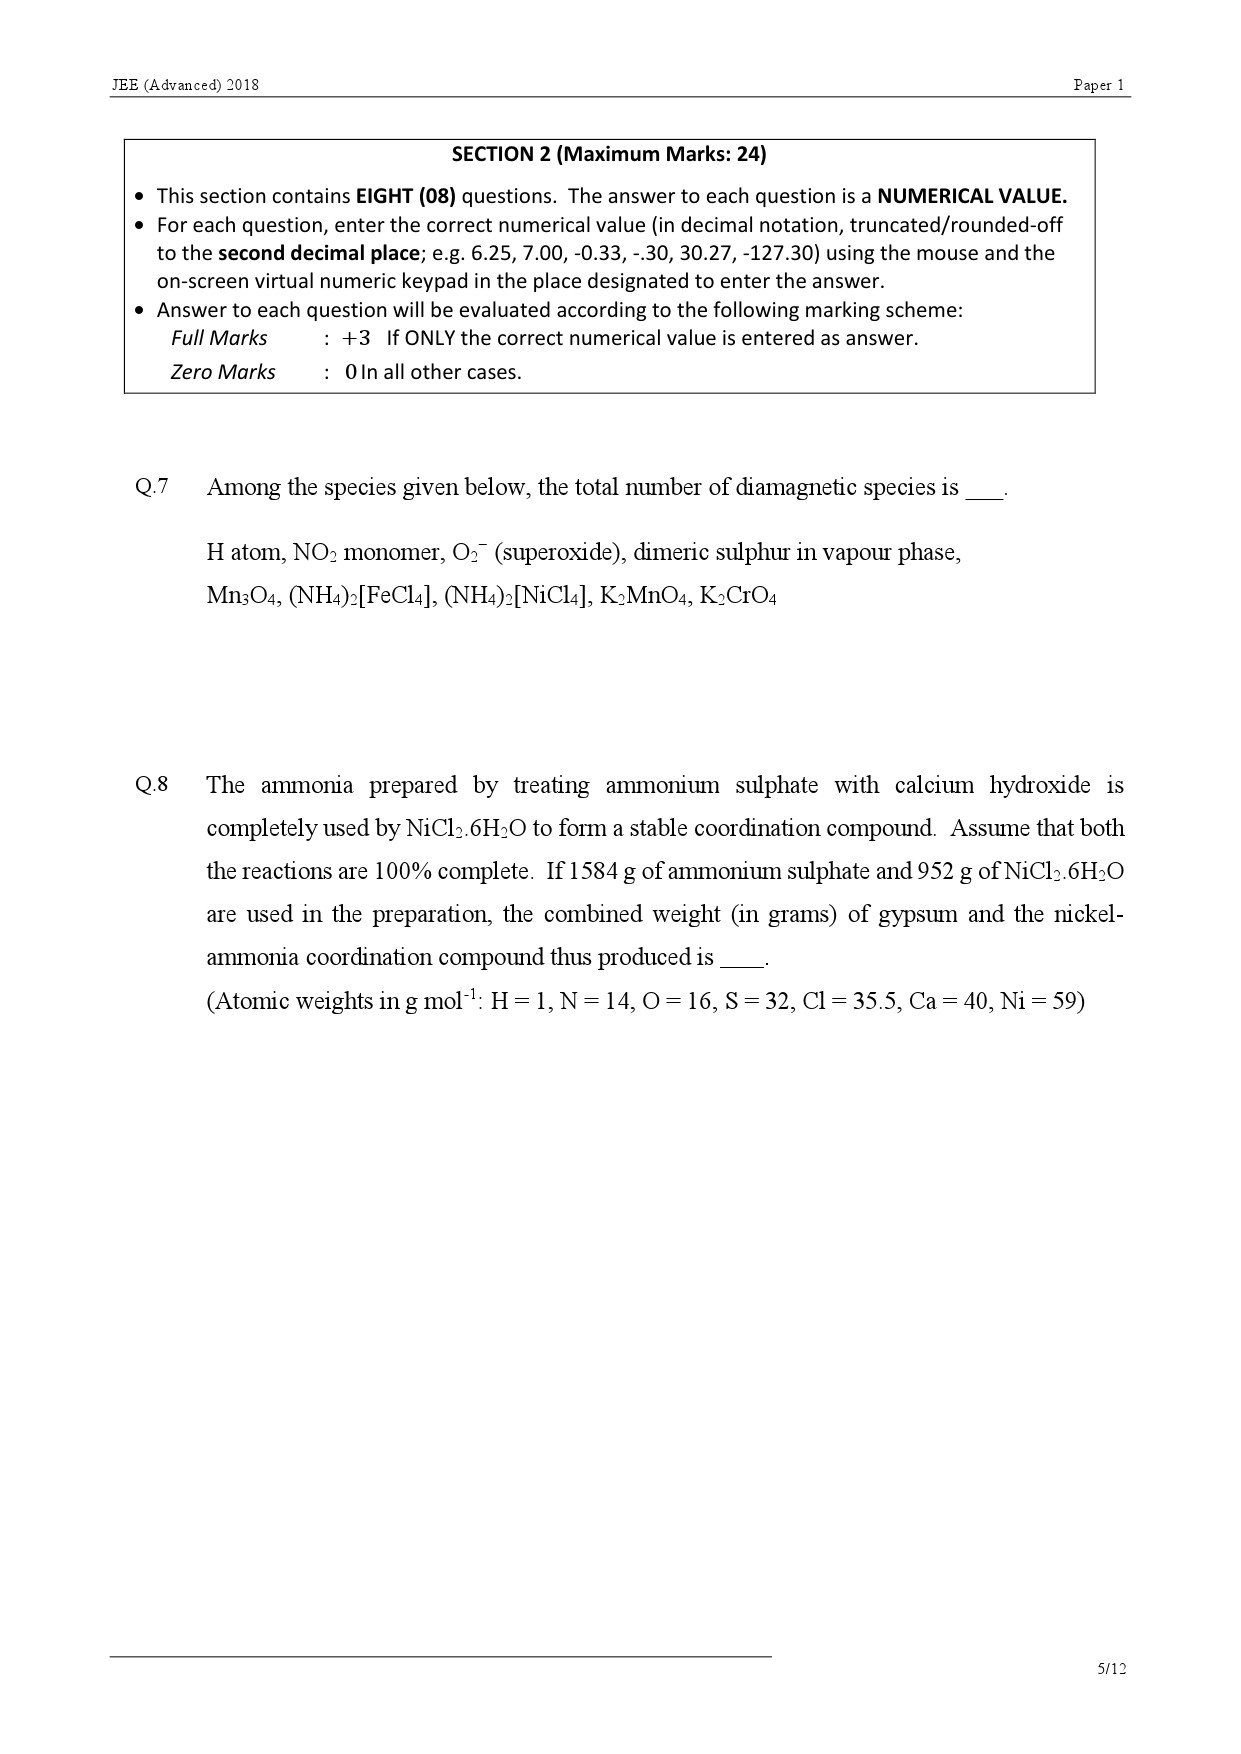 JEE Advanced Exam Question Paper 2018 Paper 1 Chemistry 5